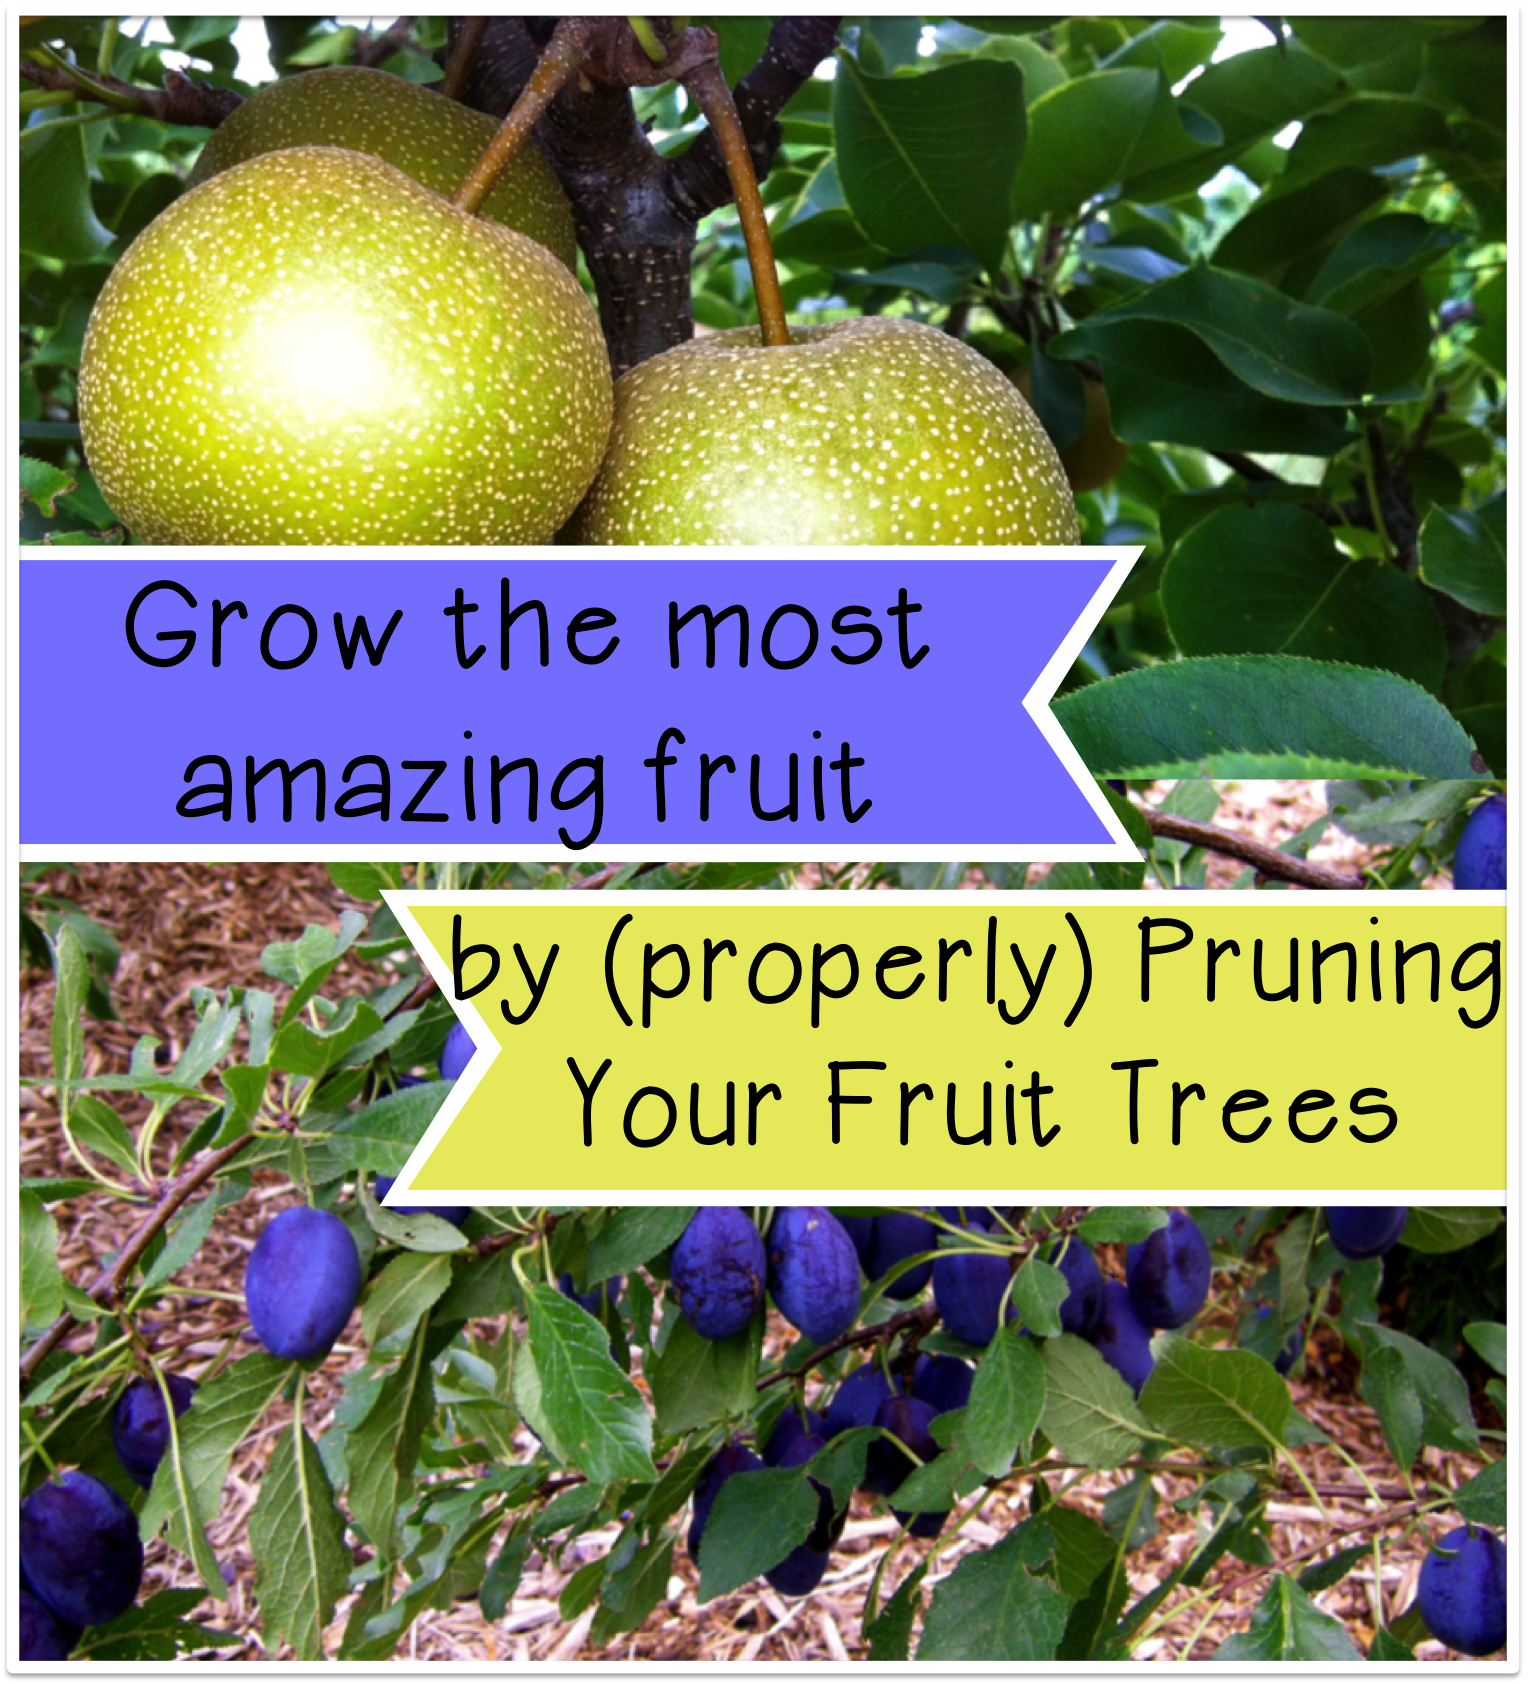 grow-the-most-amazing-fruit-by-properly-pruning-your-fruit-trees